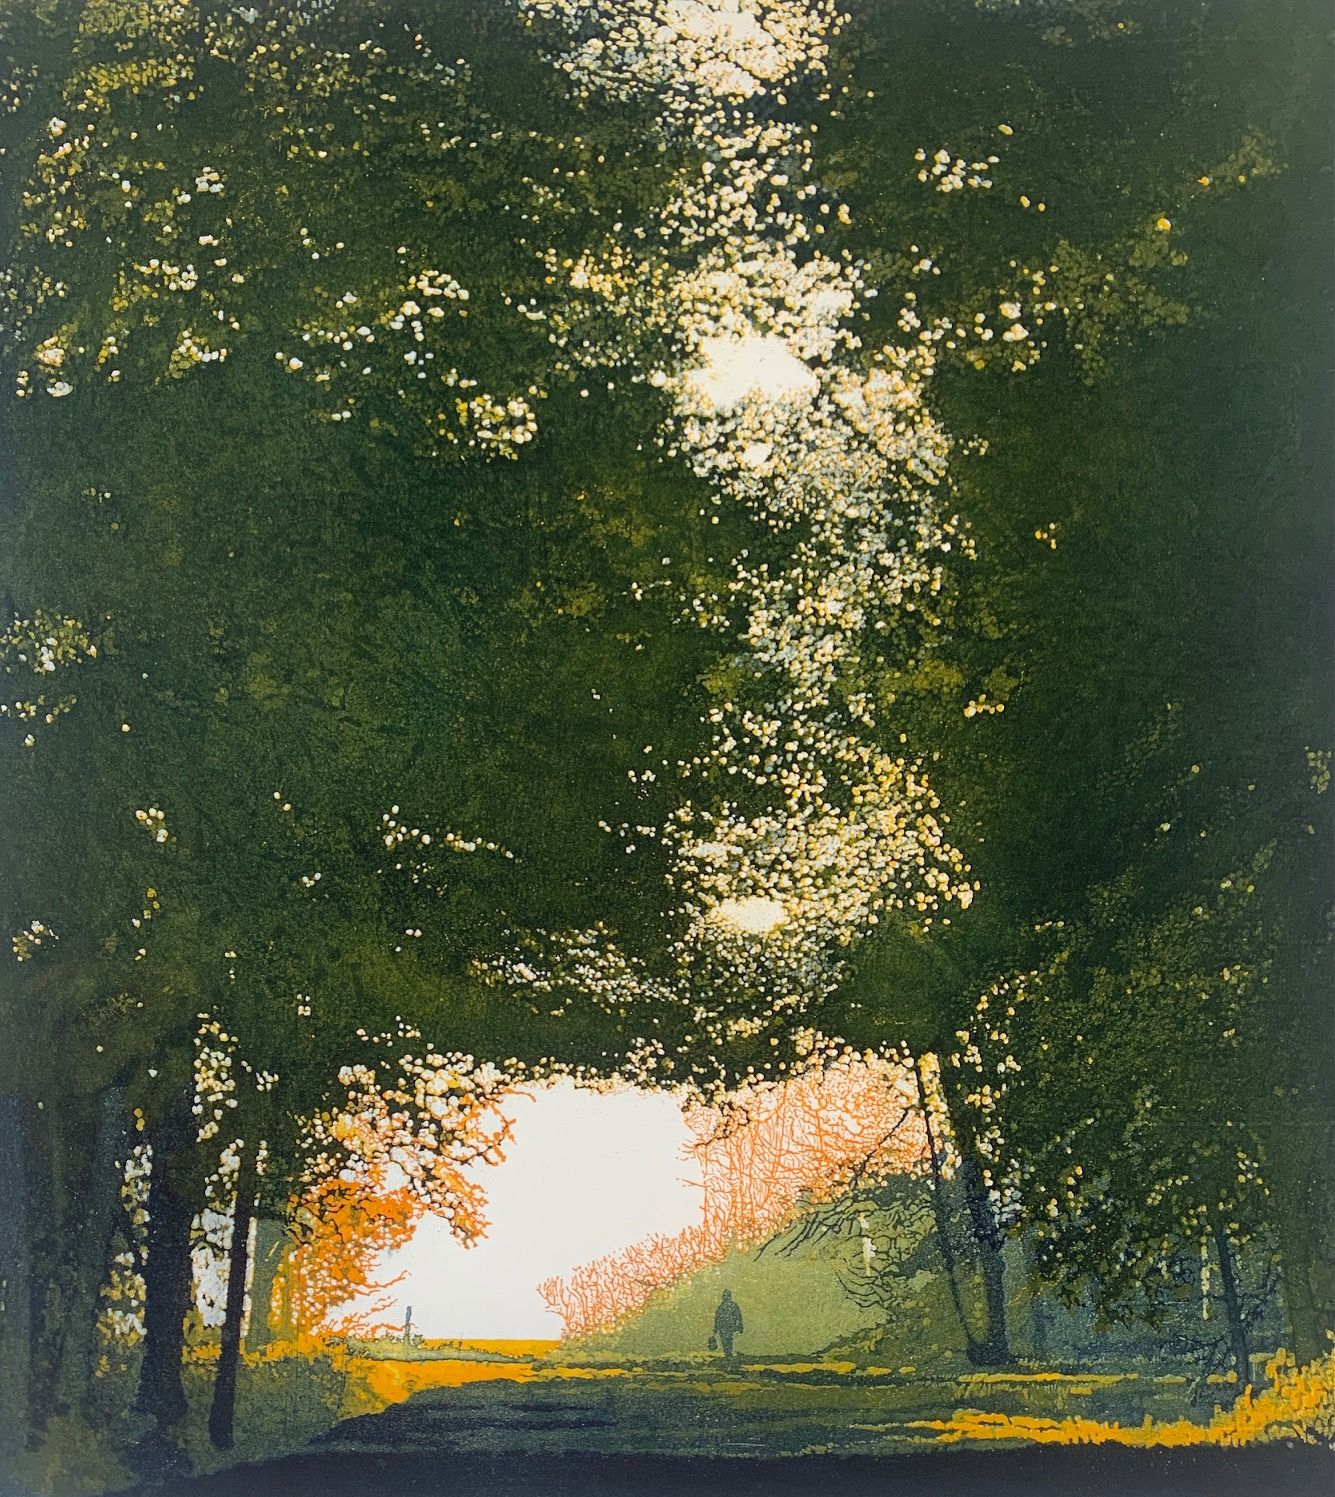 Going Home by Phil Greenwood